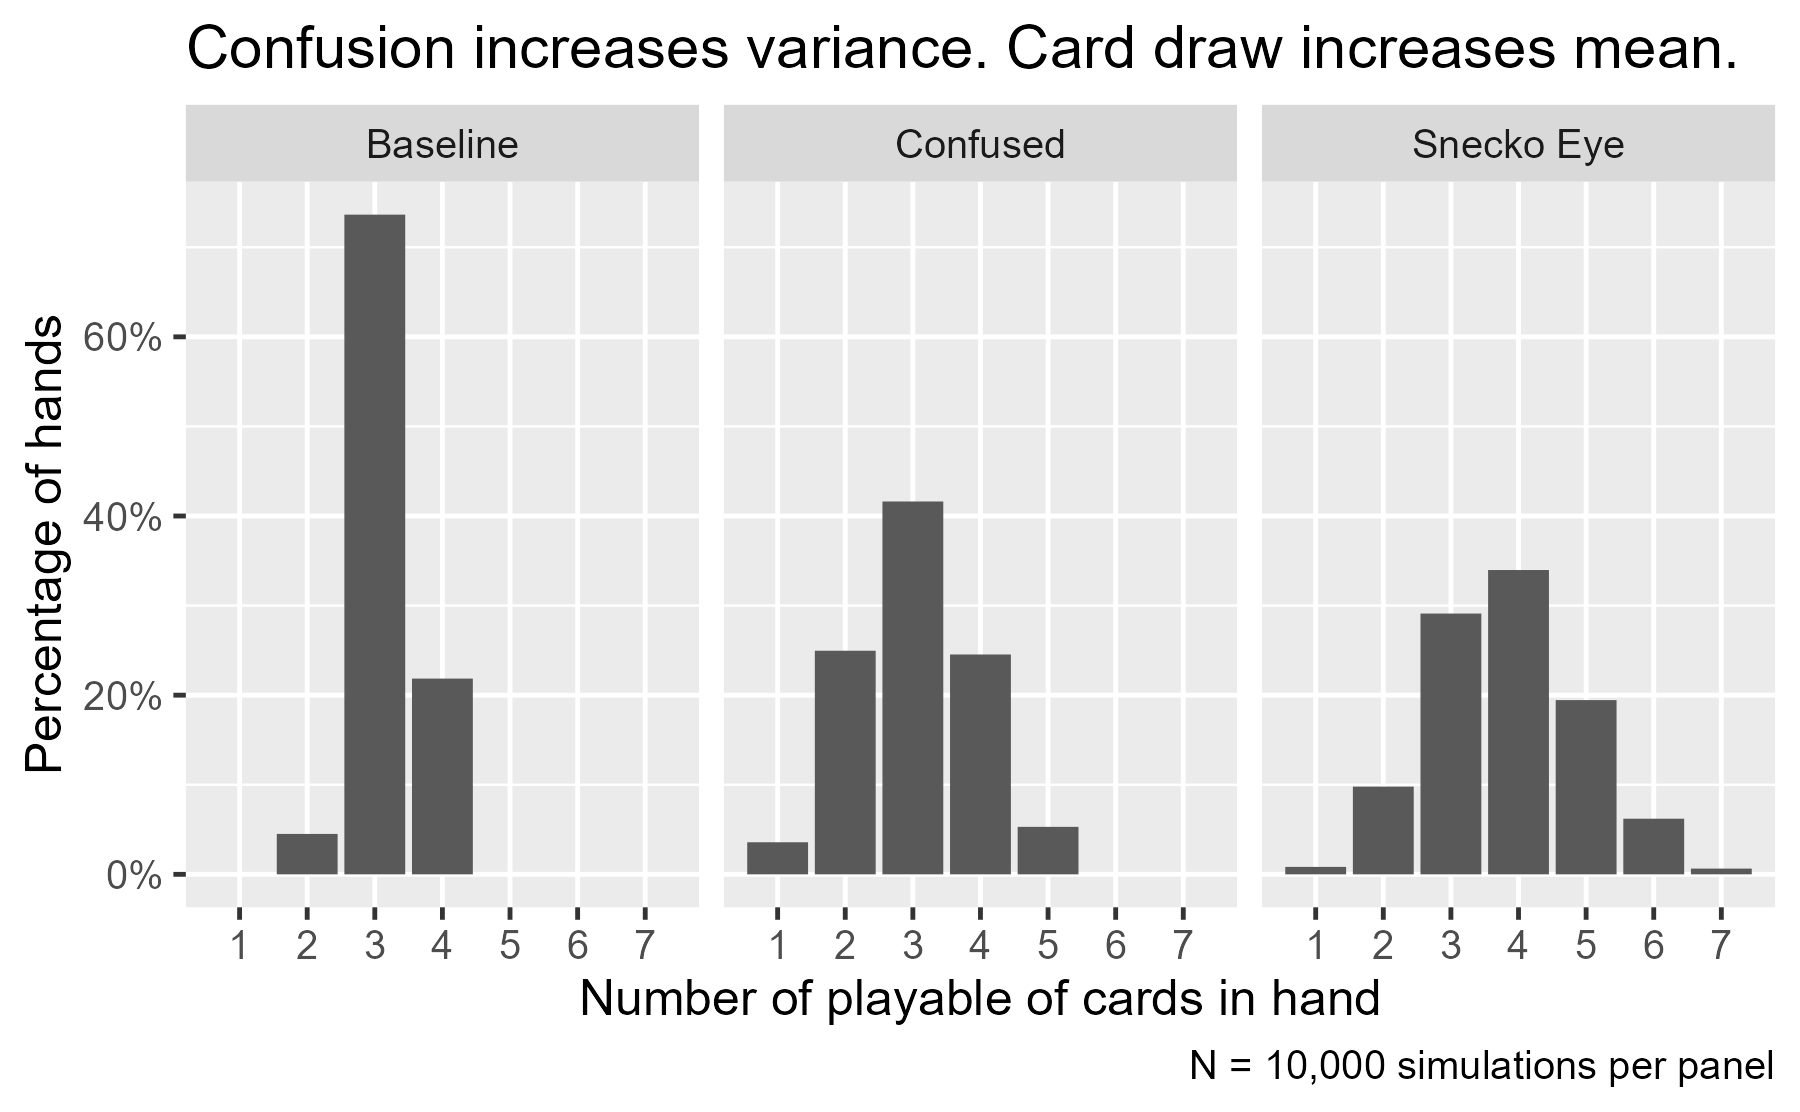 A one by three plot showing a histogram of playable cards for each simulation set. It's title says 'Confusion increases variance. Card draw increases mean.'